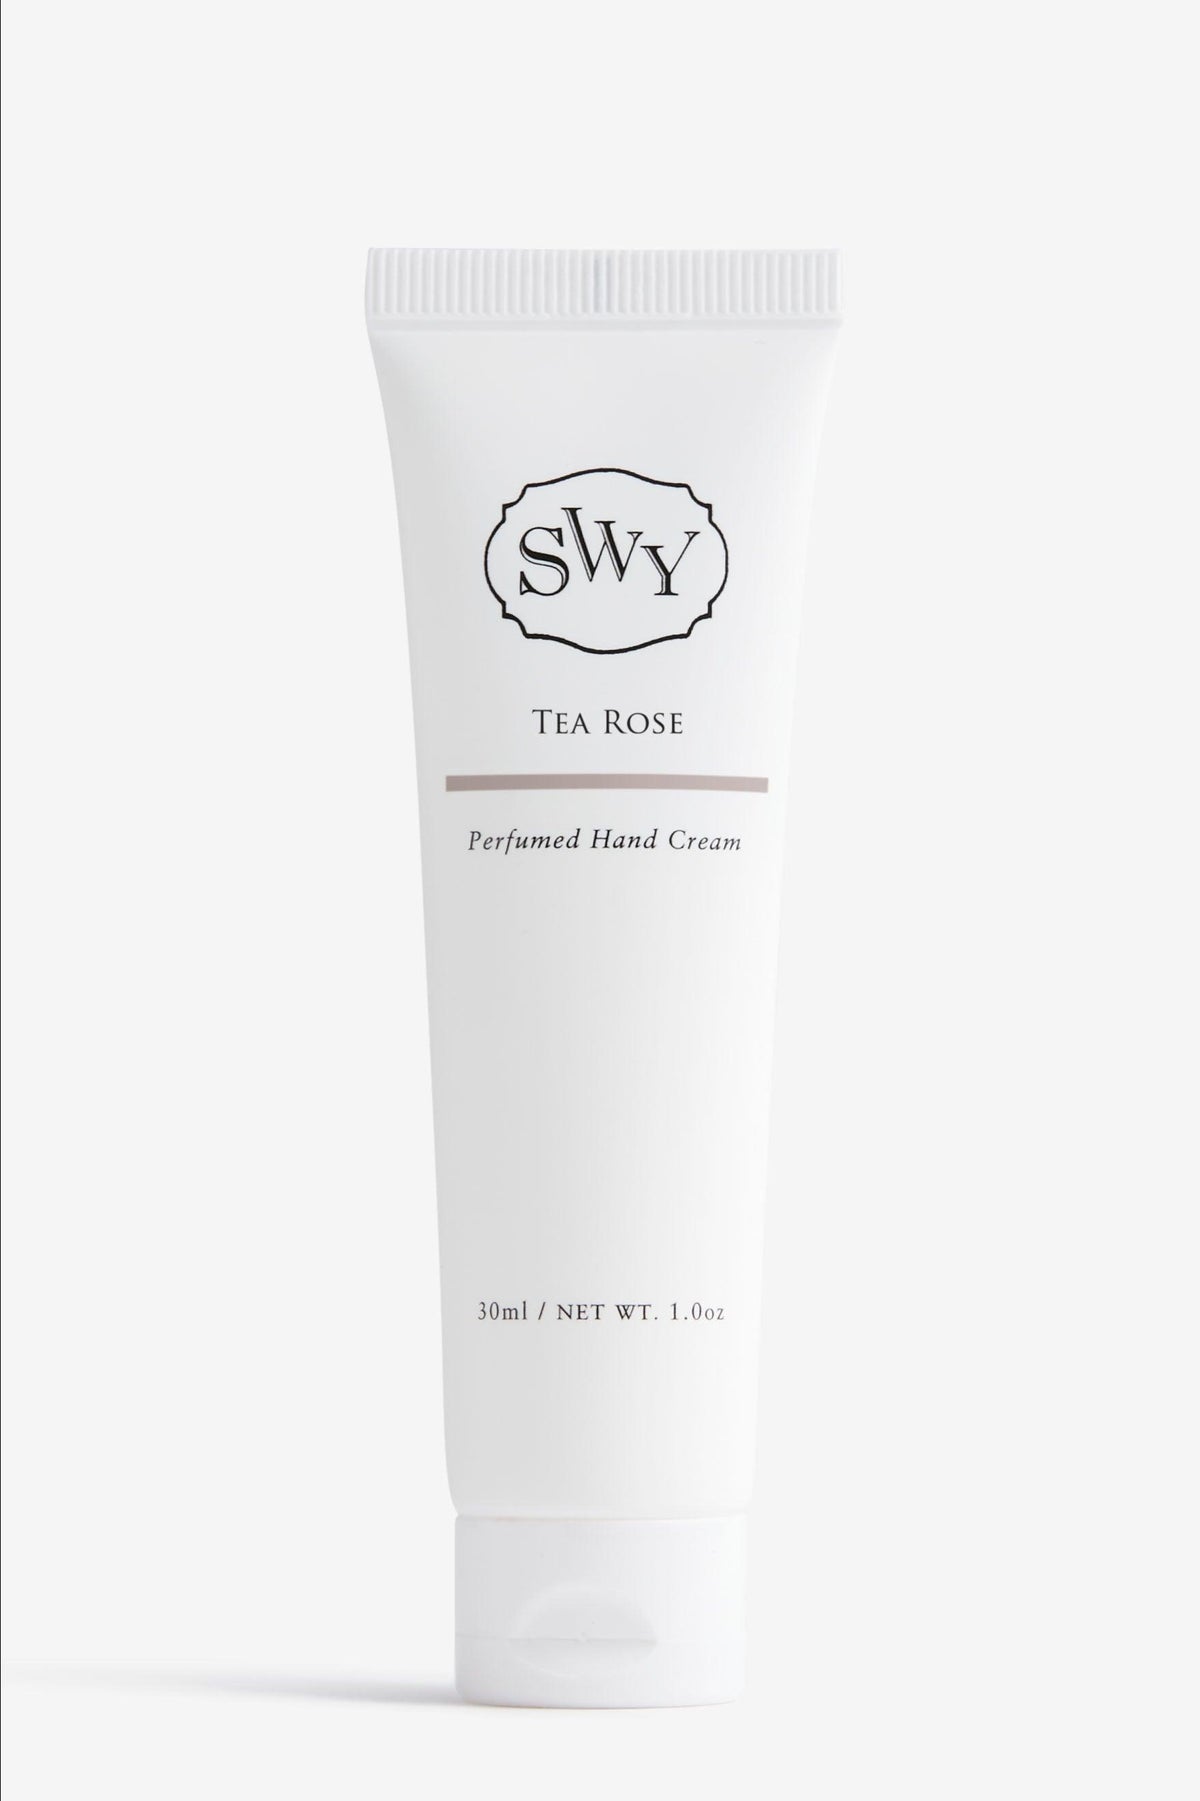 Hand Cream - pocket size - Tea Rose - SWY - Scent With You